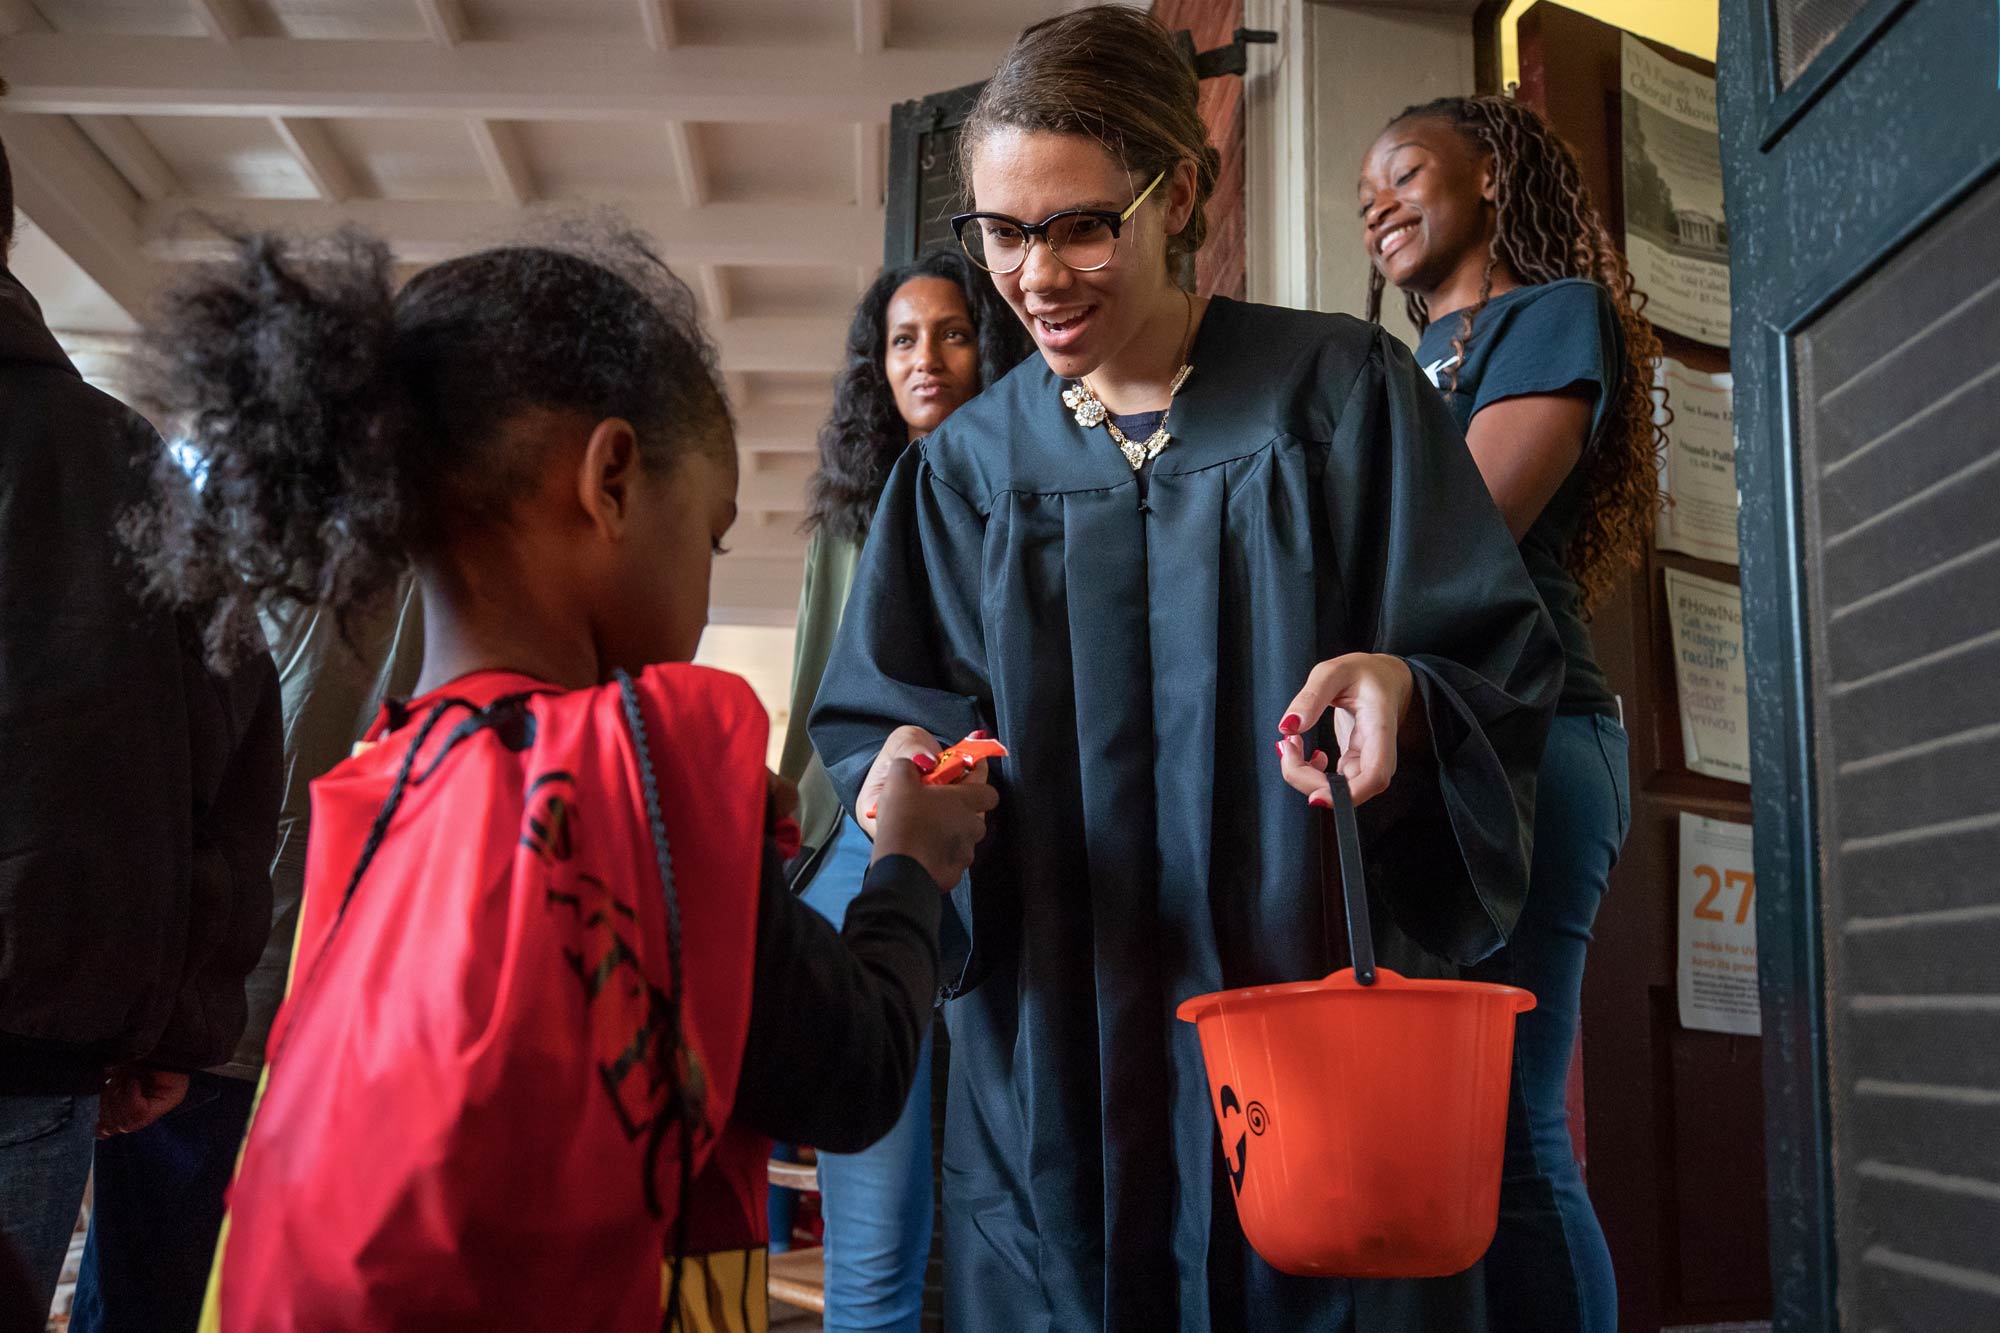 A college student in a judge's robes and glasses gives candy to a small child in a red cape